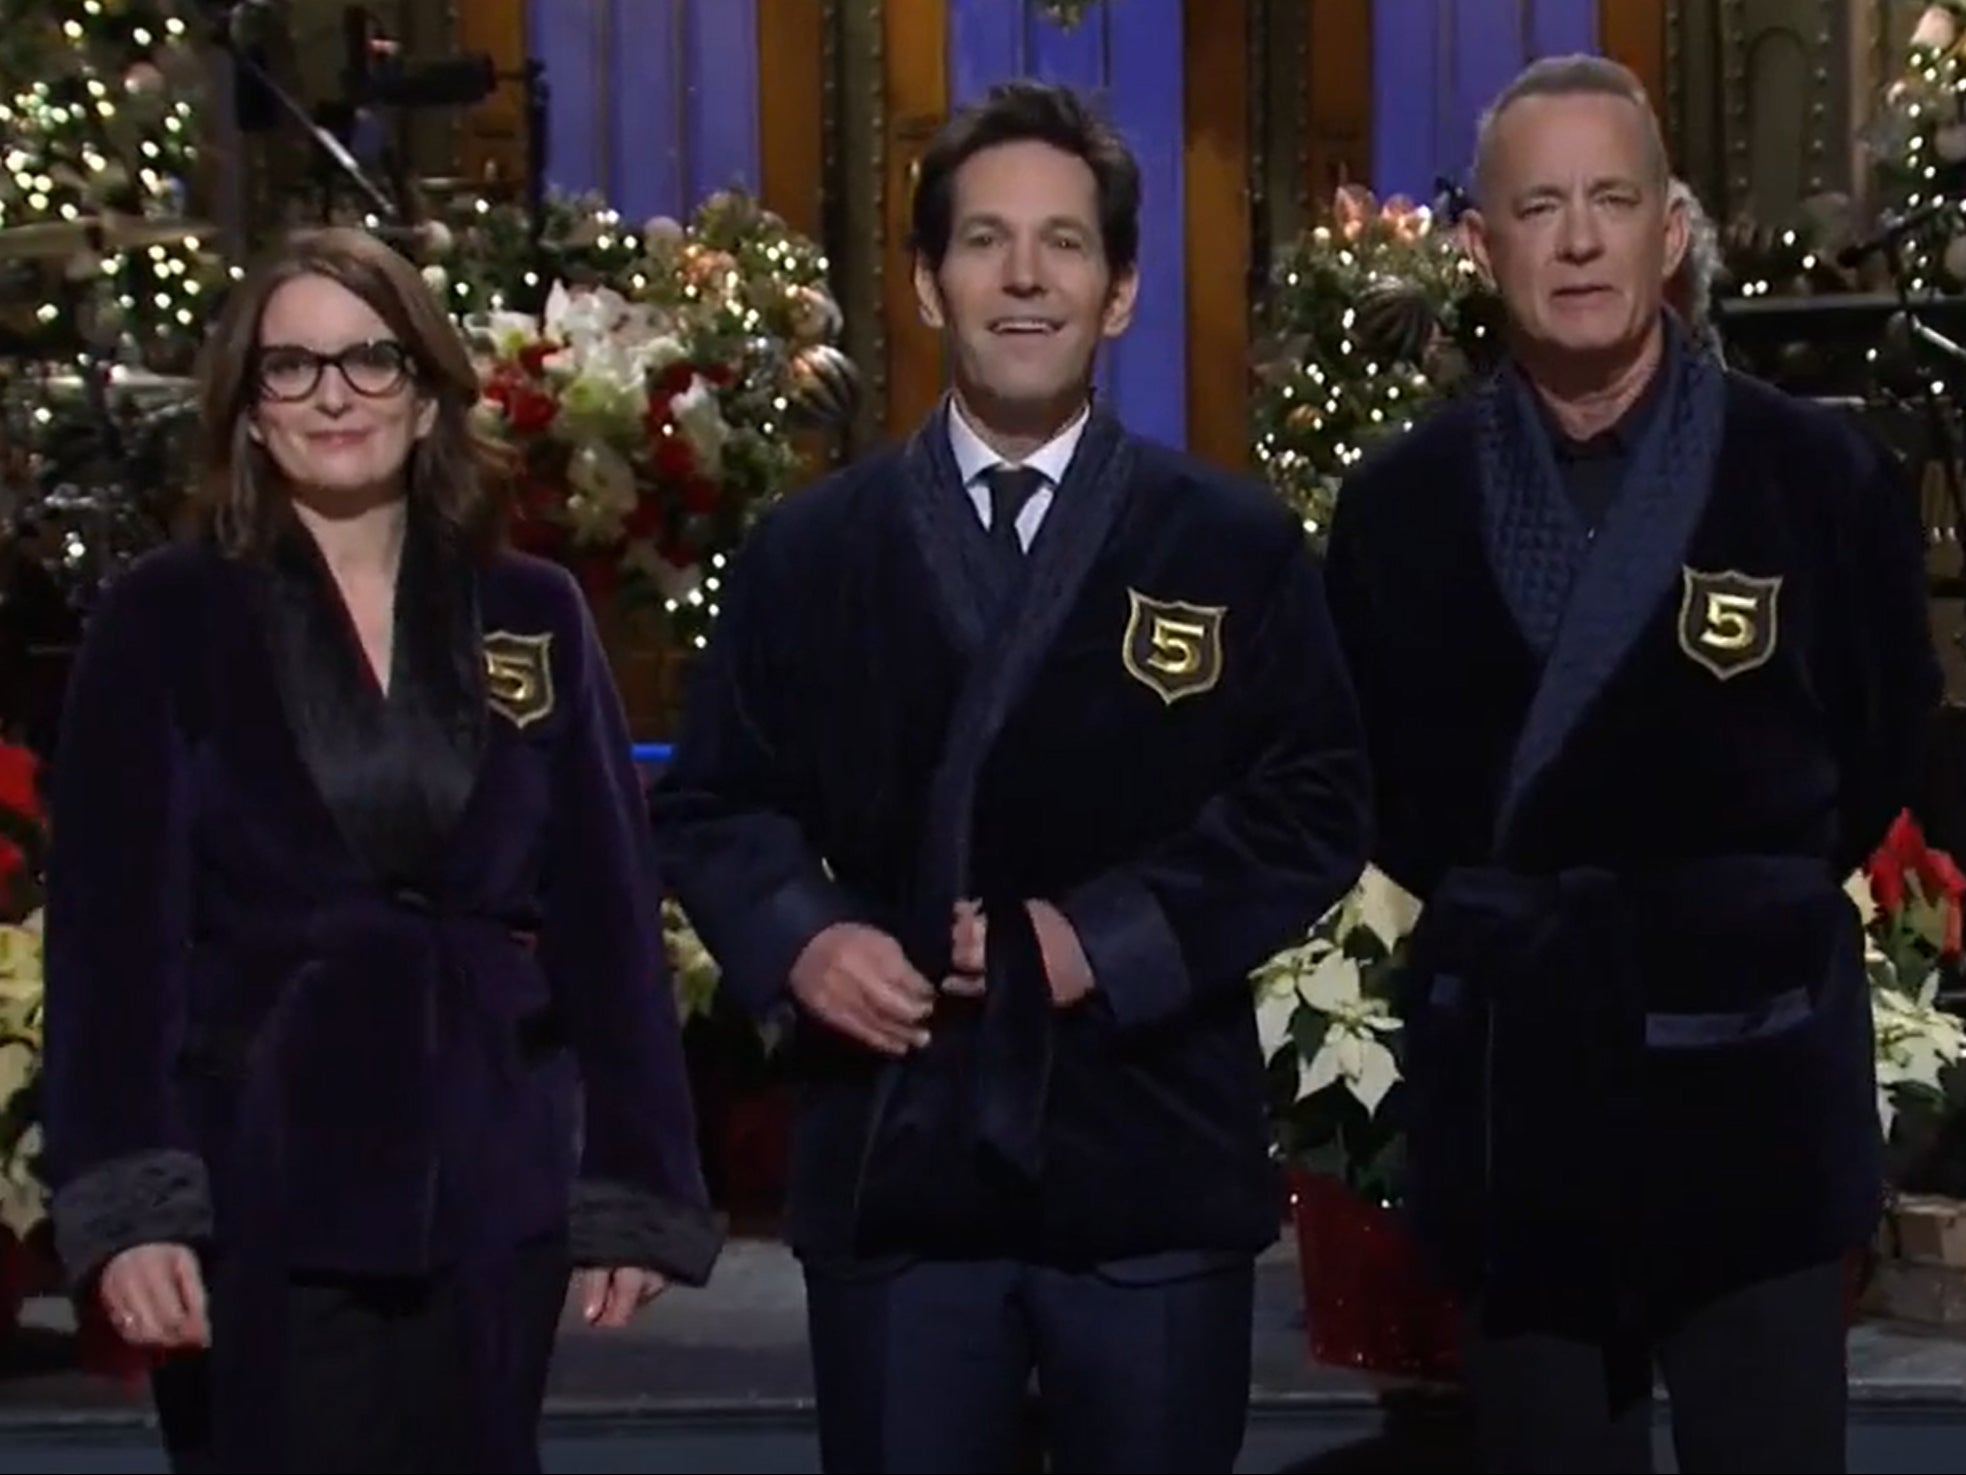 Tina Fey and Tom Hanks welcome Paul Rudd into the SNL hosts’ ‘Five Timer Club’